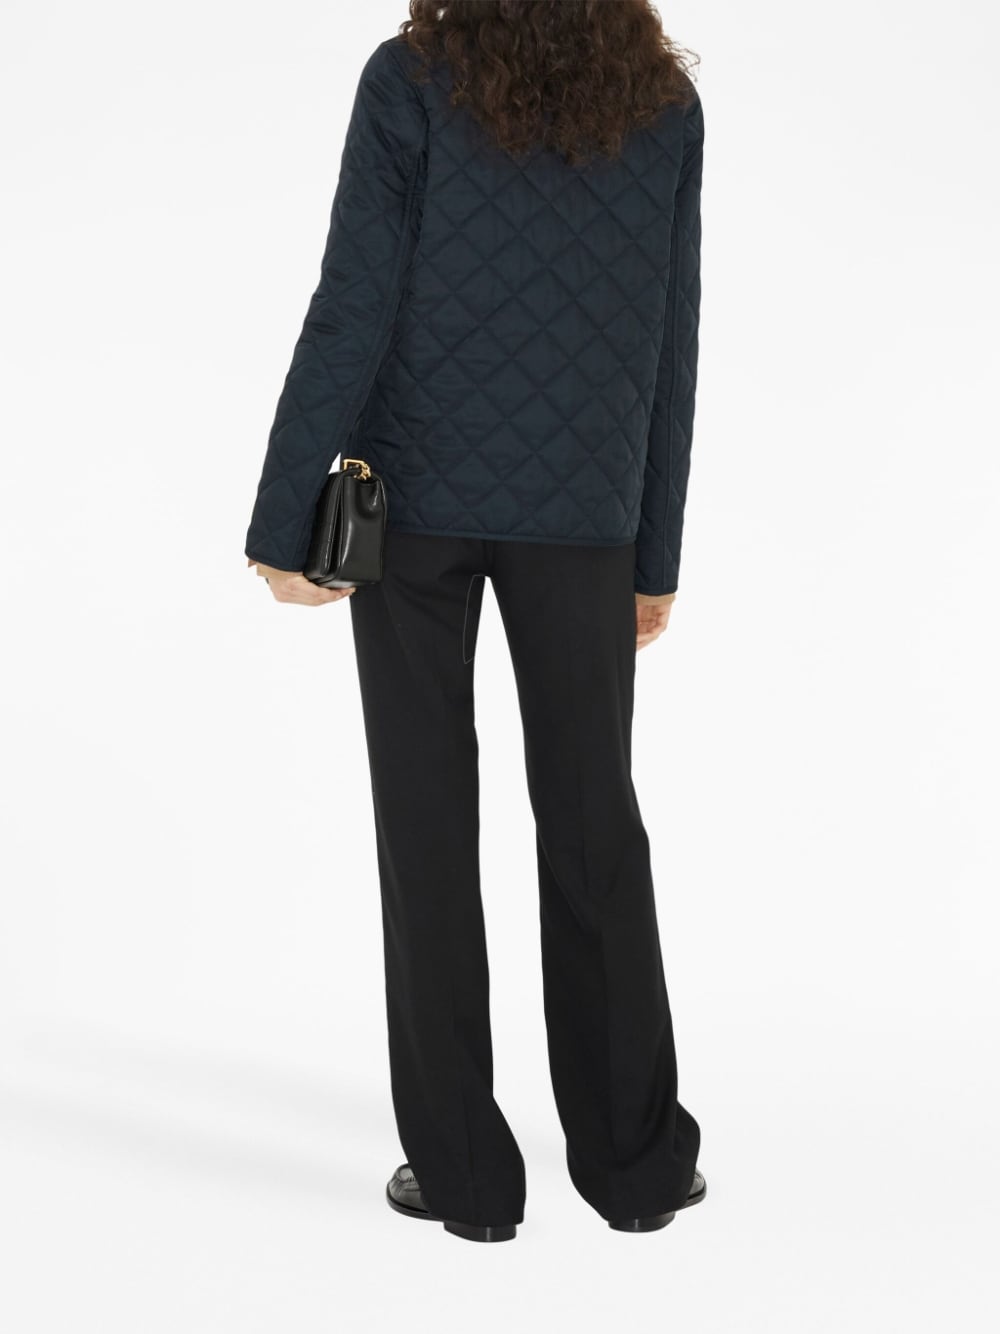 Shop Burberry Midnight Blue Diamond-quilted Jacket For Women With Corduroy Collar And Patch Pockets